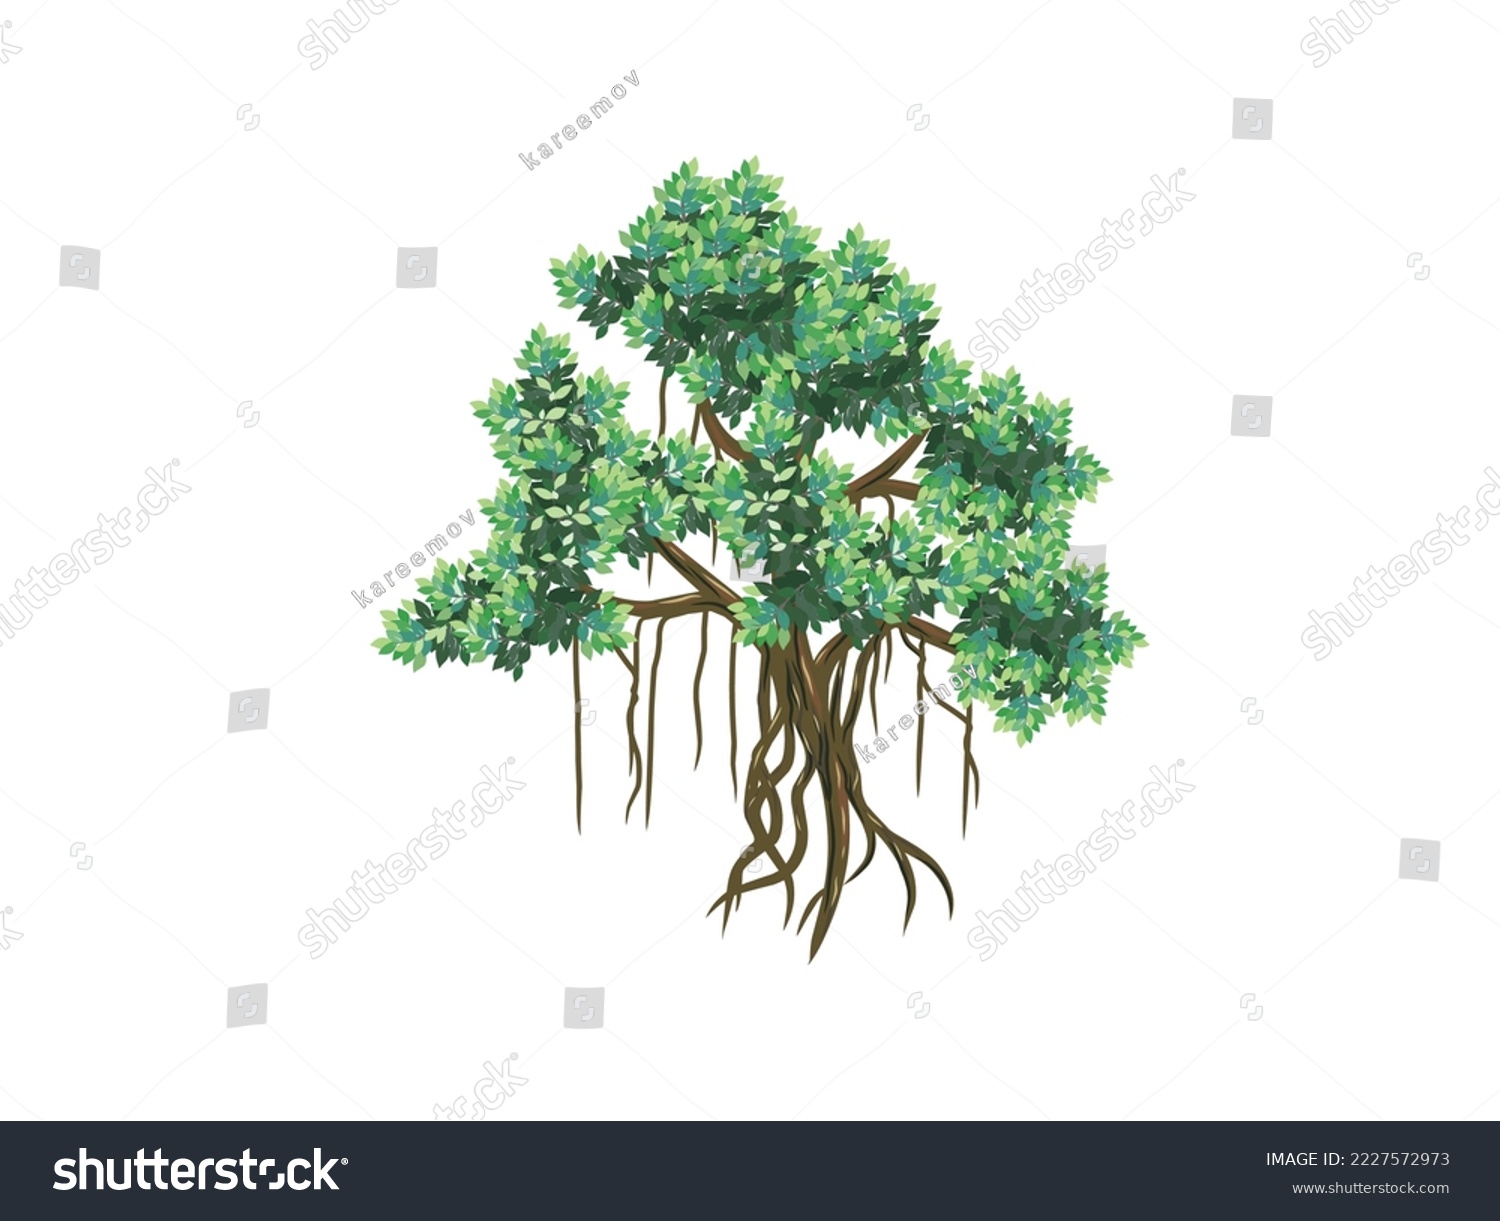 SVG of Banyan tree vector illustrations, hand drawn art isolated on white. svg